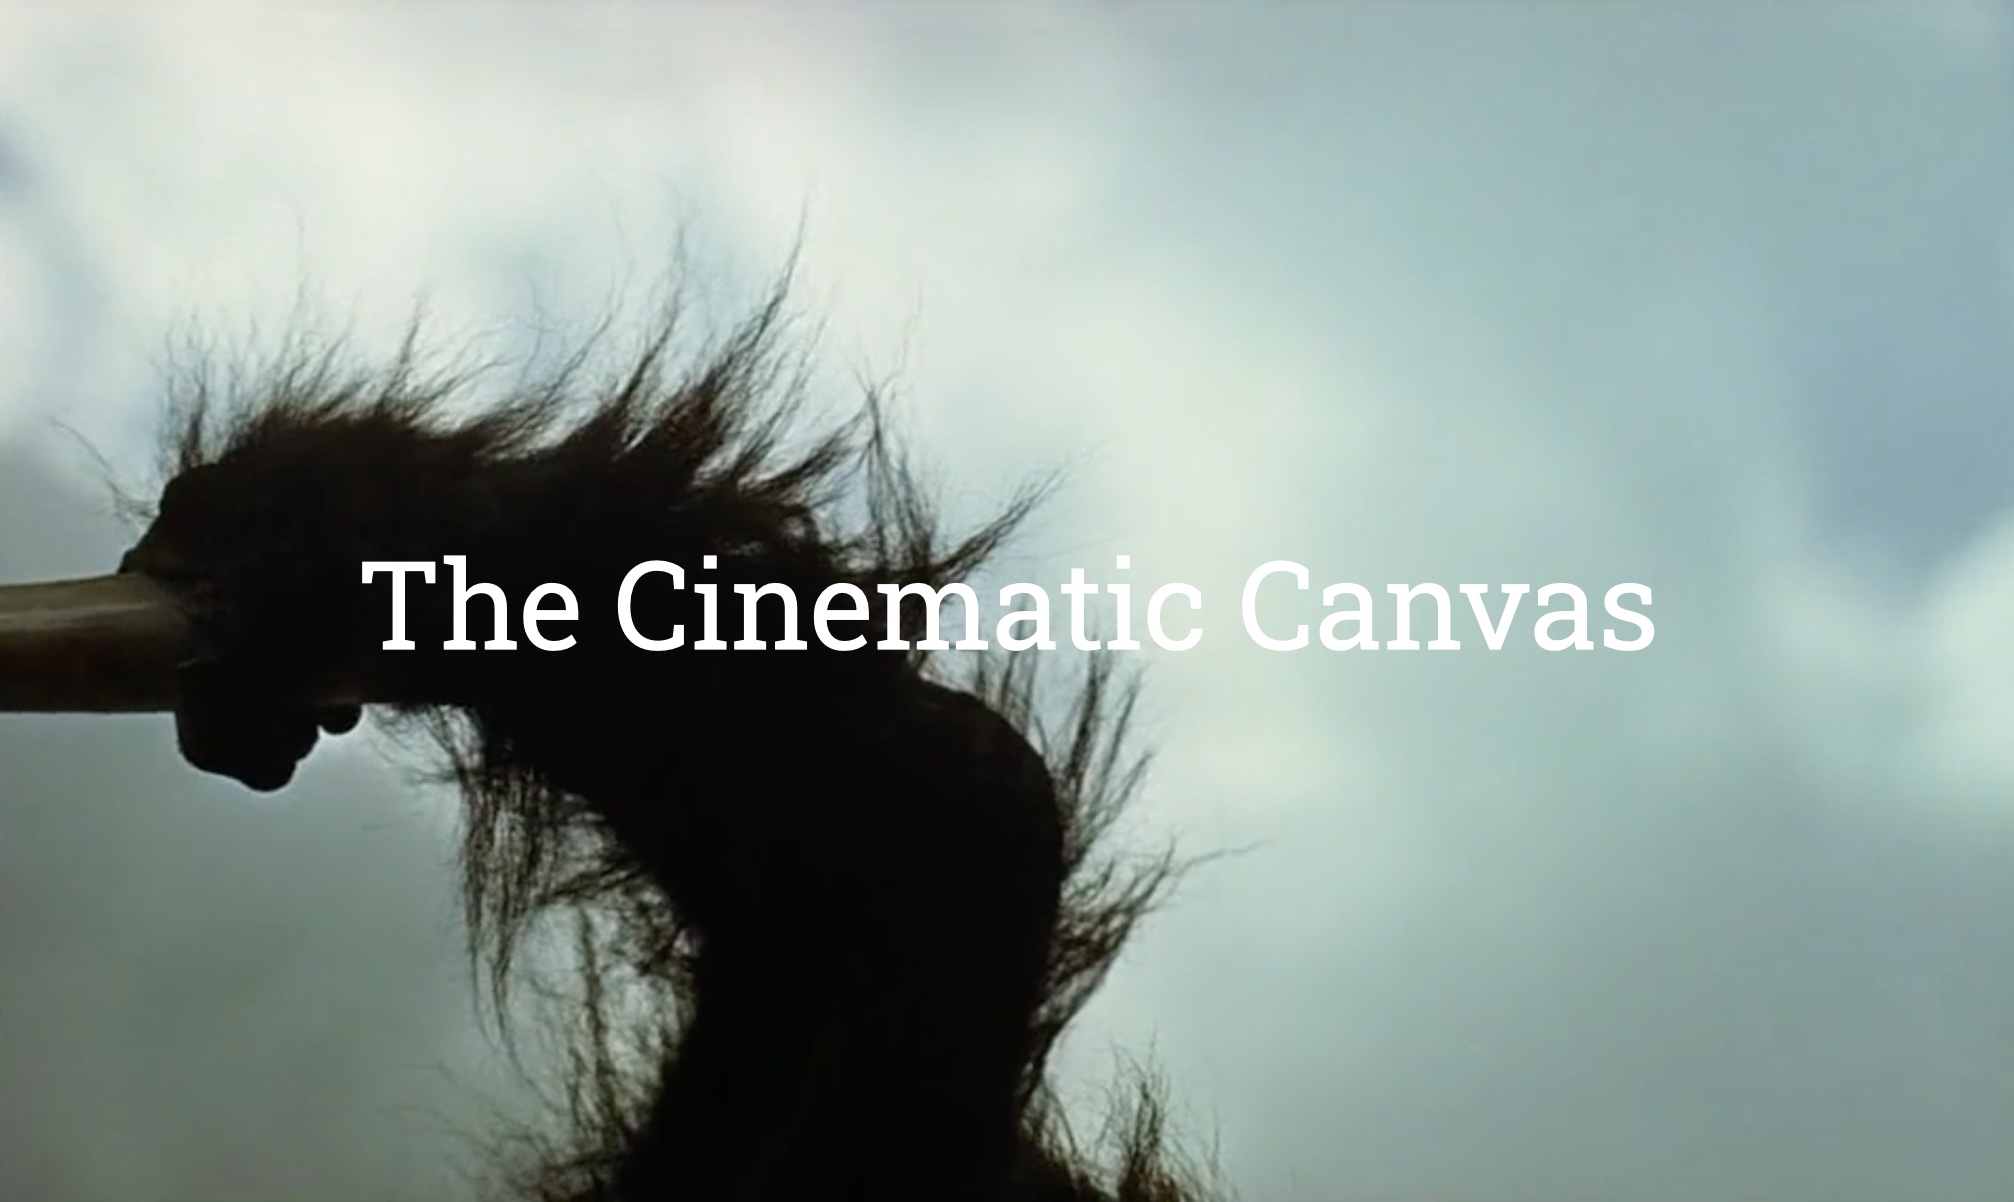 The Cinematic Canvas